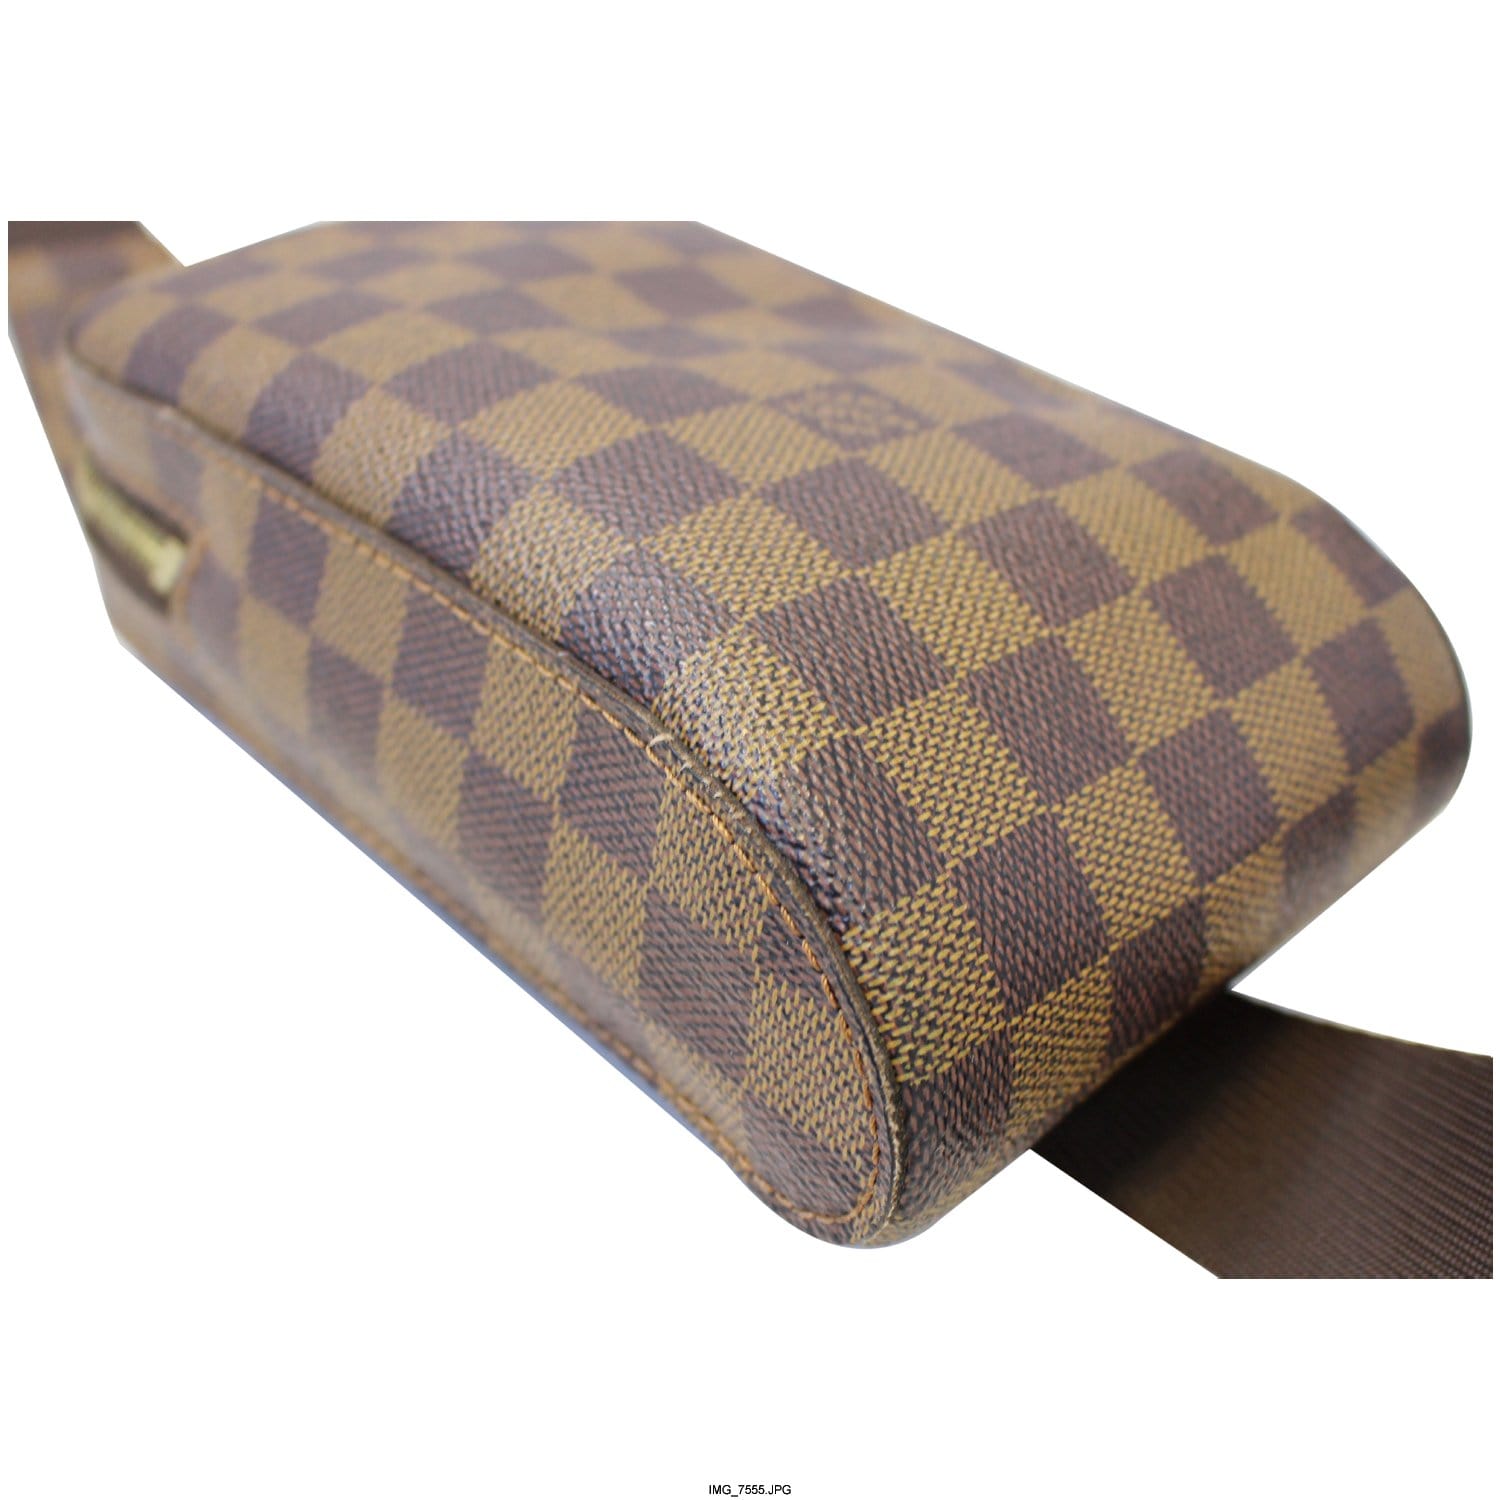 LOUIS VUITTON clutch bag in Azur checkered canvas and natural cow